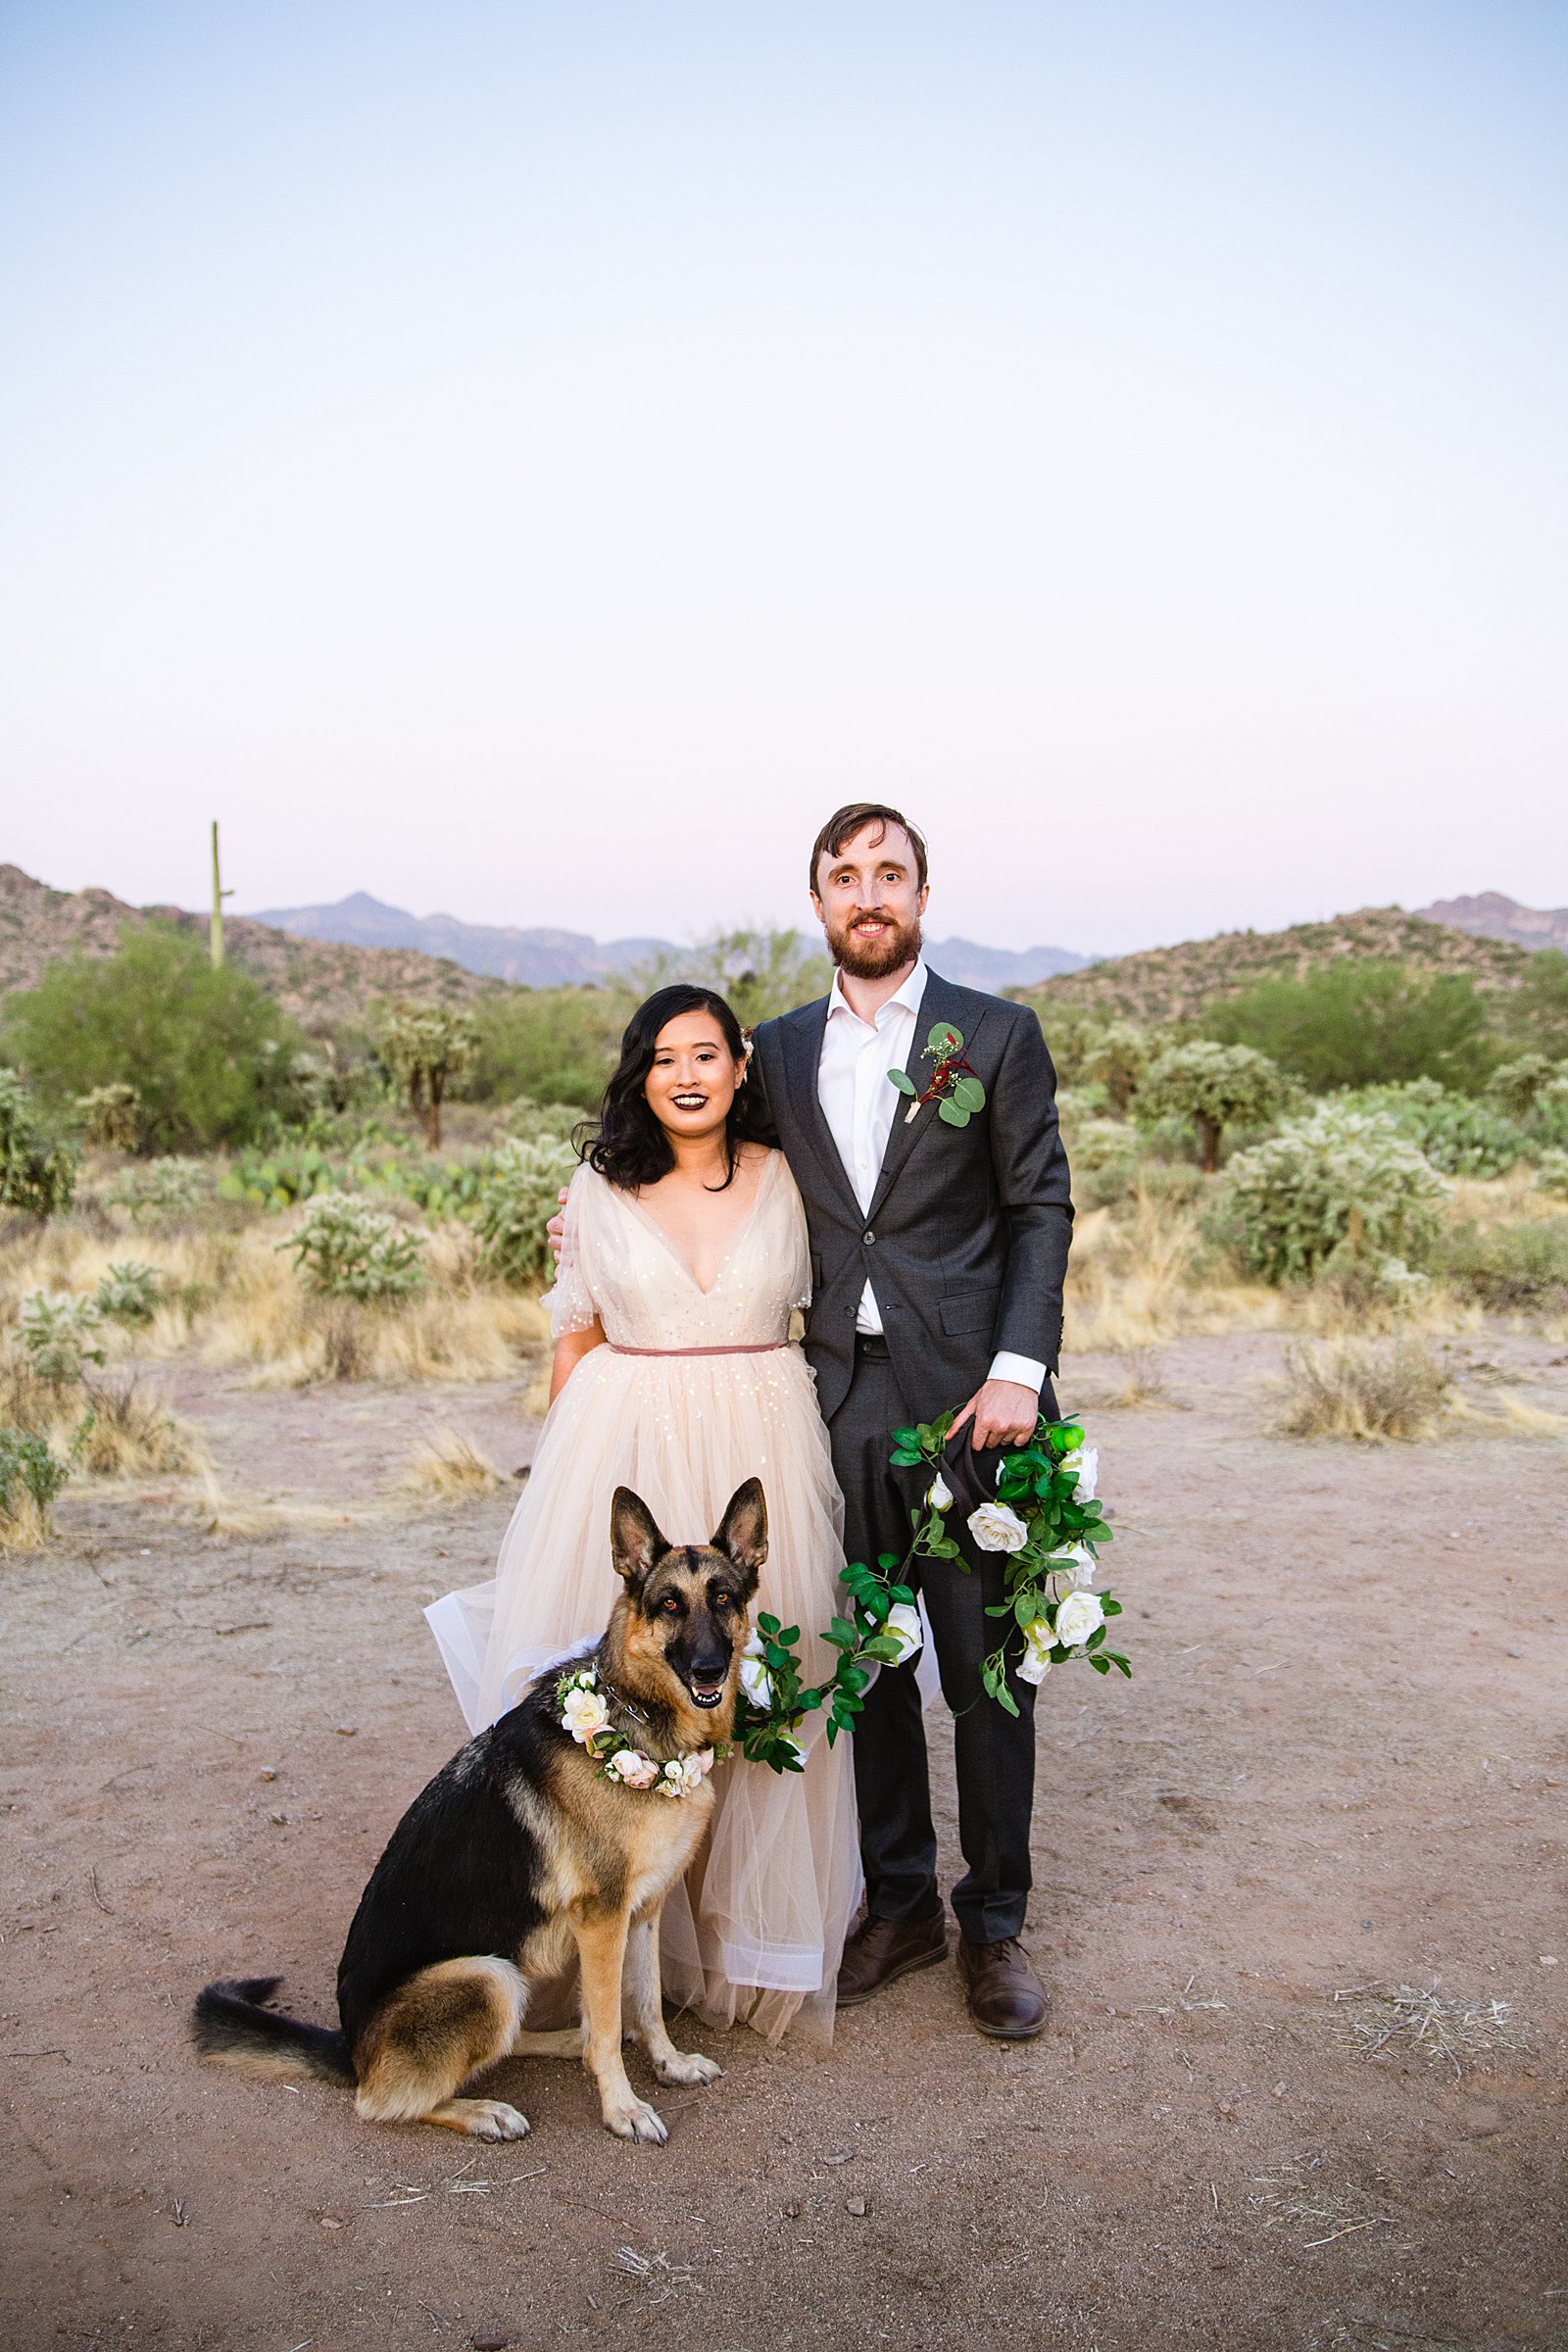 Bride and groom pose with their dog at a romantic desert wedding by PMA Photography.